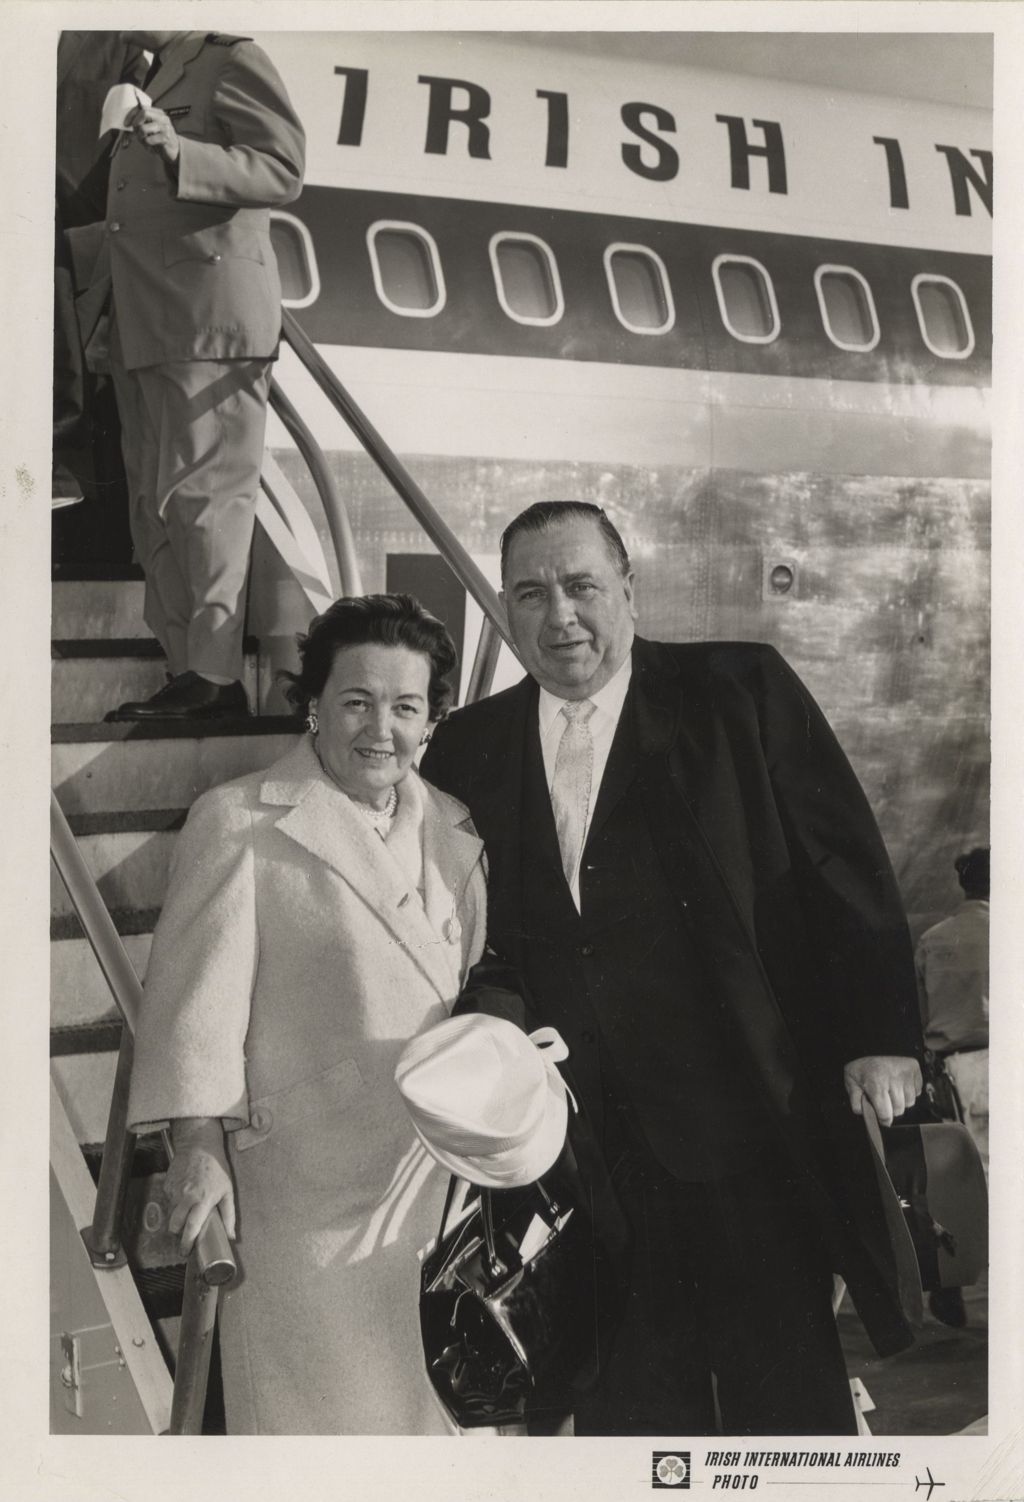 Miniature of Richard J. and Eleanor Daley on the steps of an airplane before their first trip to Ireland